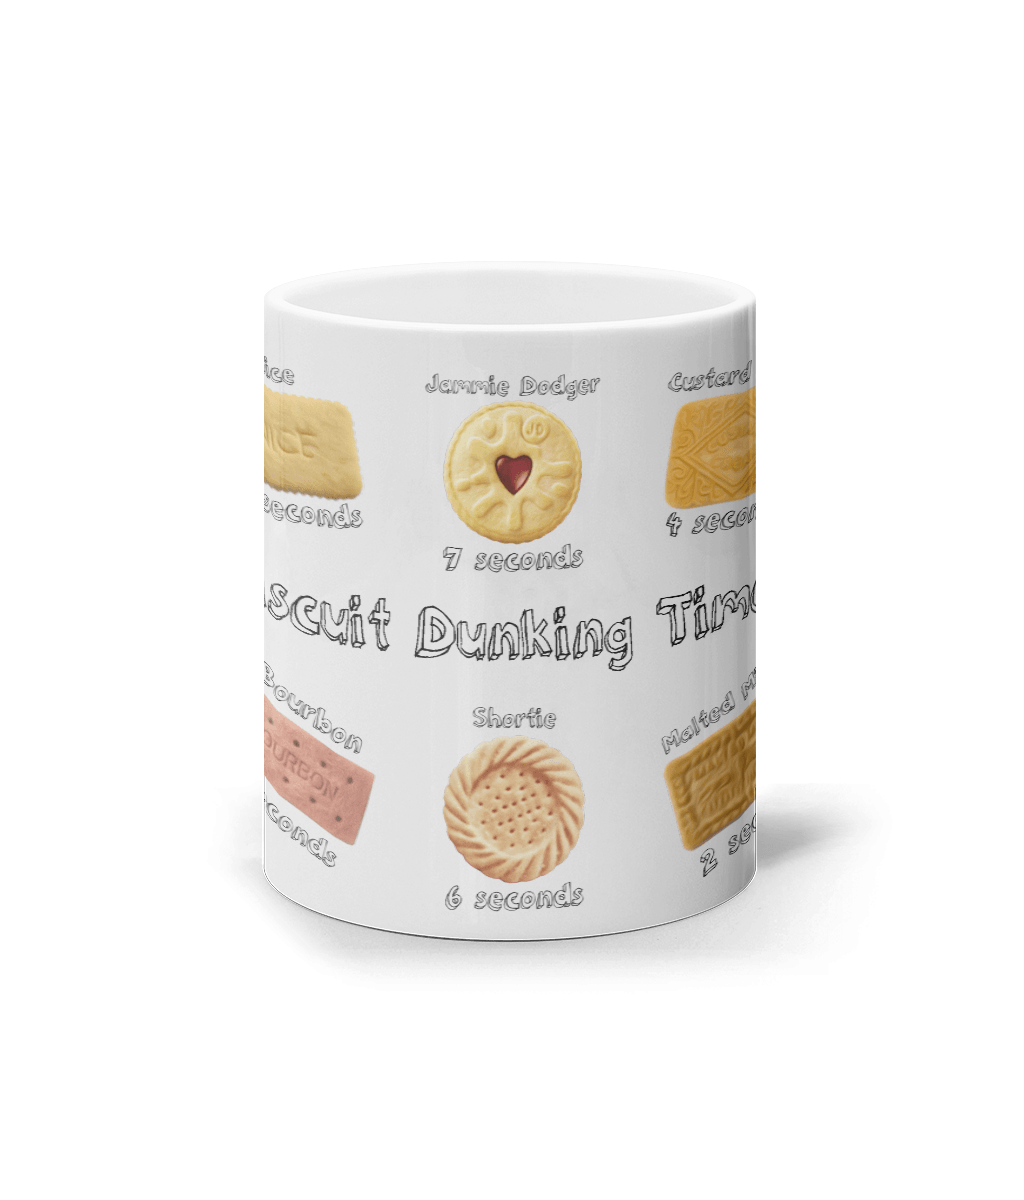 Top 10 Biscuits Mug With Dunk Seconds - DuvetDay.co.uk